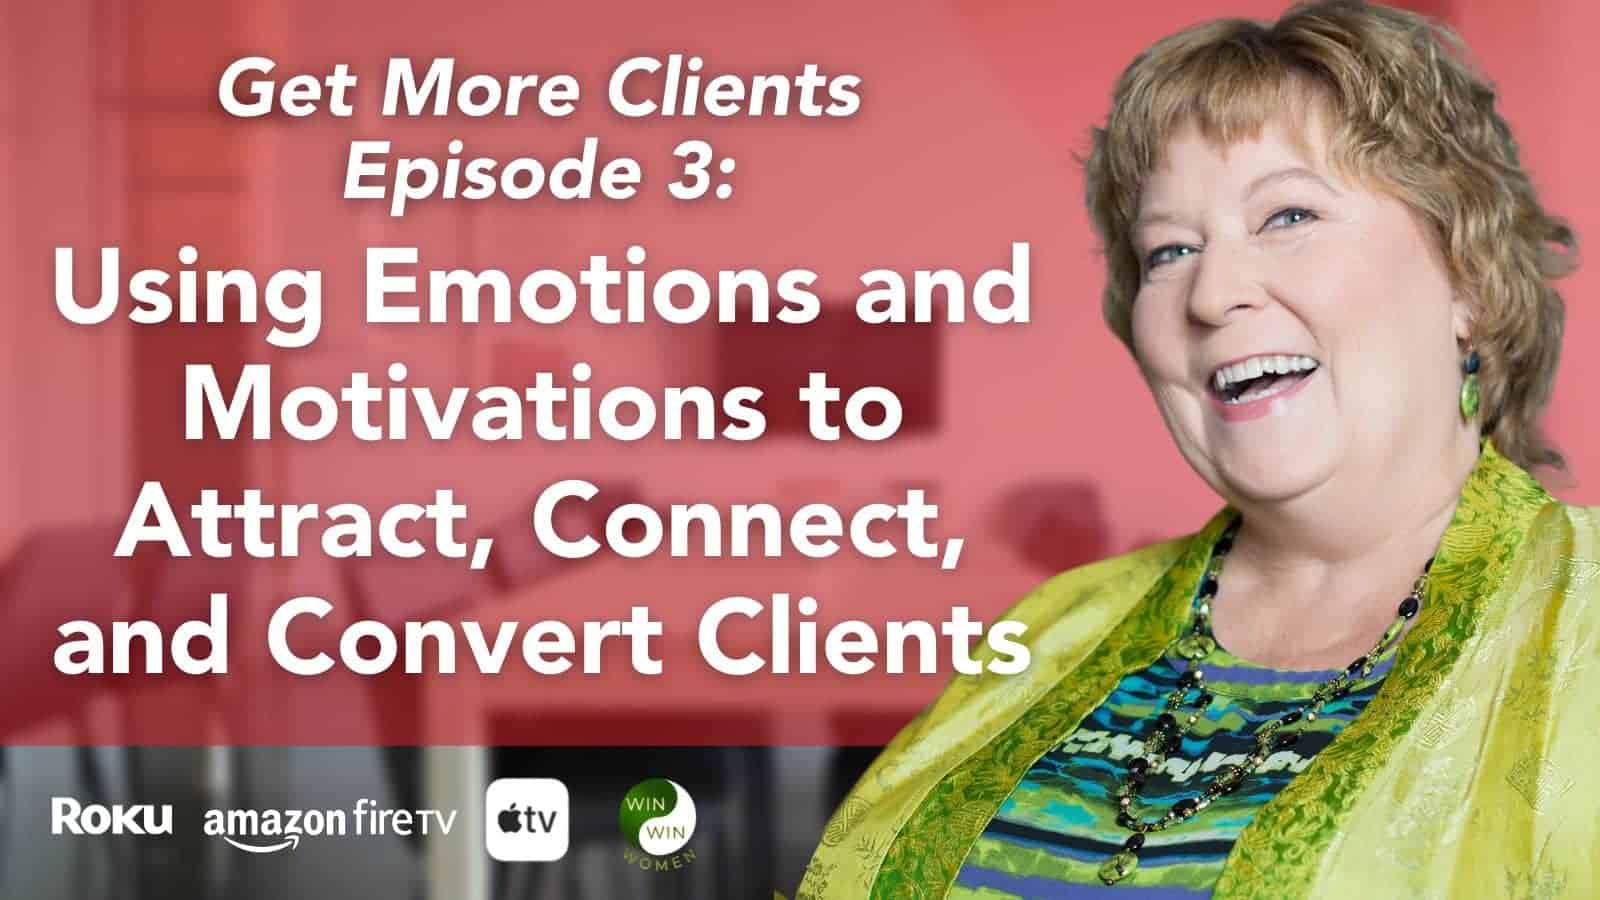 Using Emotions and Motivations to Attract, Connect, and Convert Clients